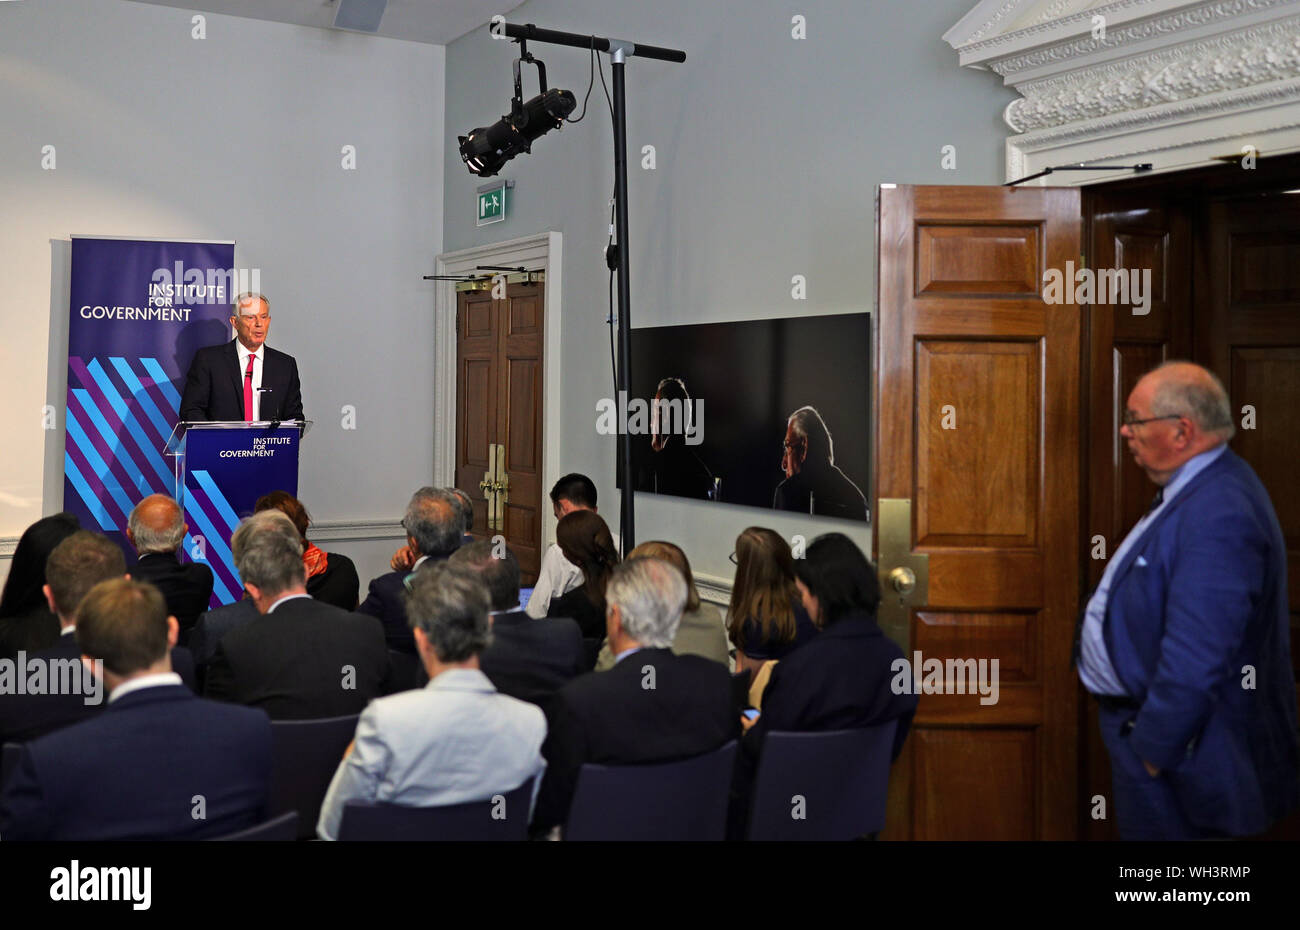 Former prime minister Tony Blair speaking at the Institute for Government in central London where he called for Labour to oppose any move by Boris Johnson to hold an emergency general election until Brexit has been resolved. Stock Photo